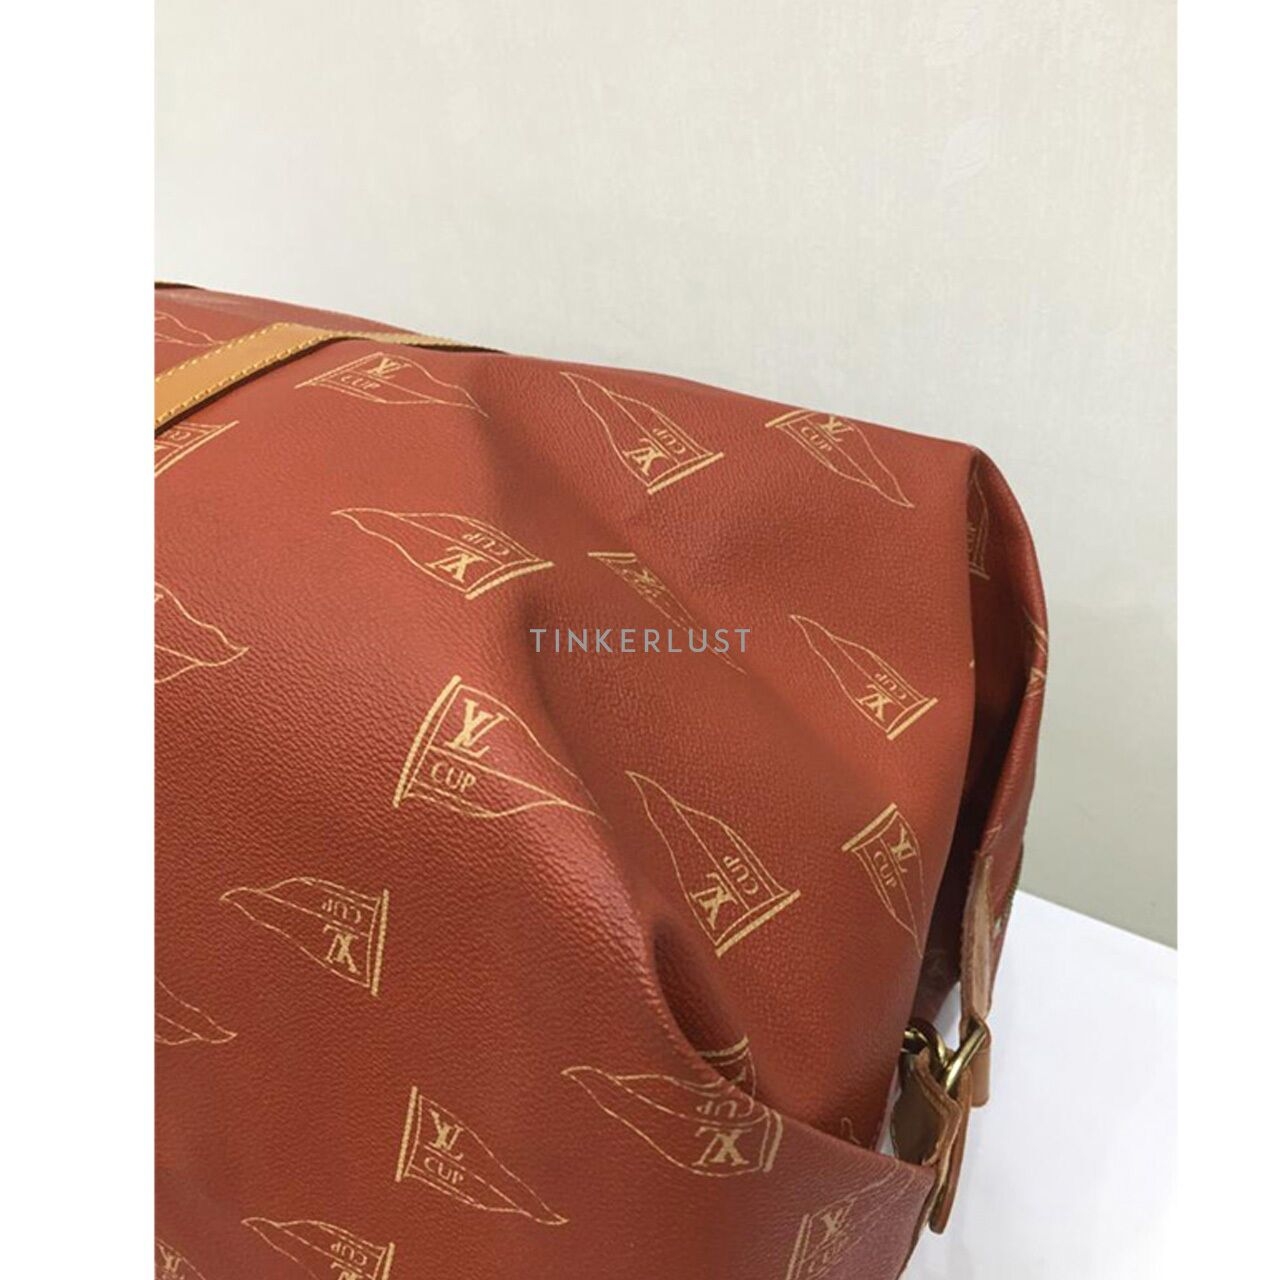 Louis Vuitton Vintage 45 Limited Edition Red America Cup Keepall 1994 Travel Bag